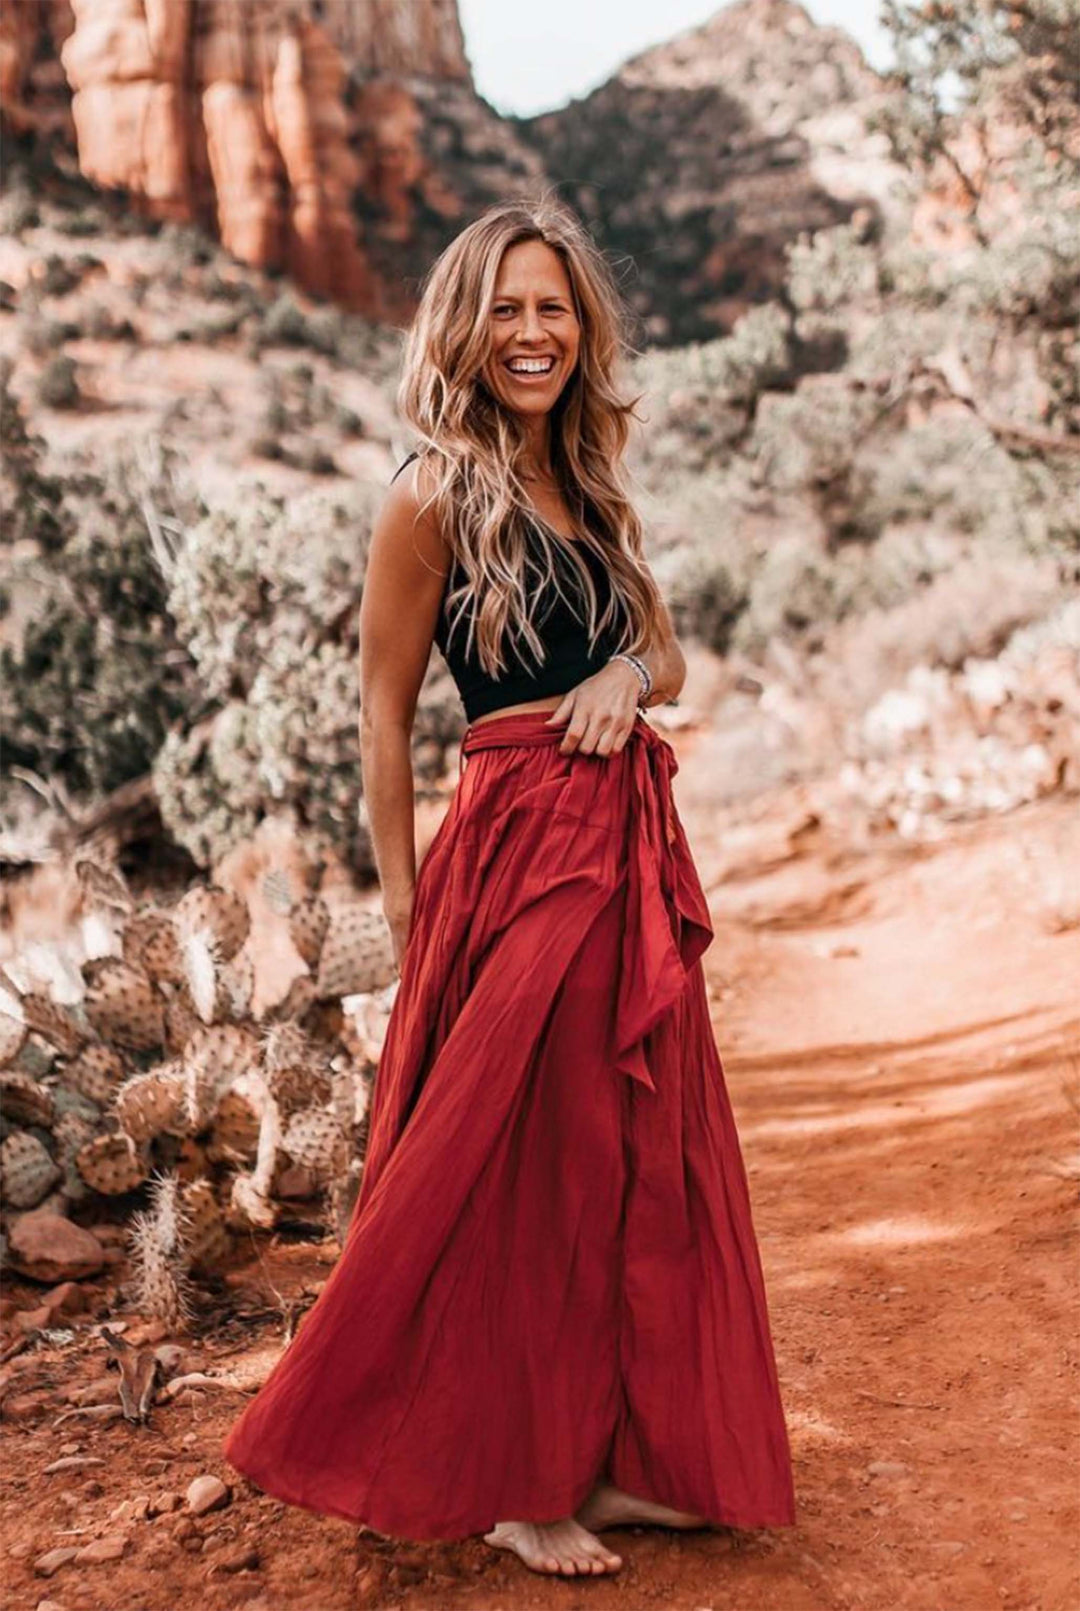 Female model standing outside with mountains and cactus in background. she is wearing a black tank crop top and long red cotton gauze skirt with bow. She is barefoot.